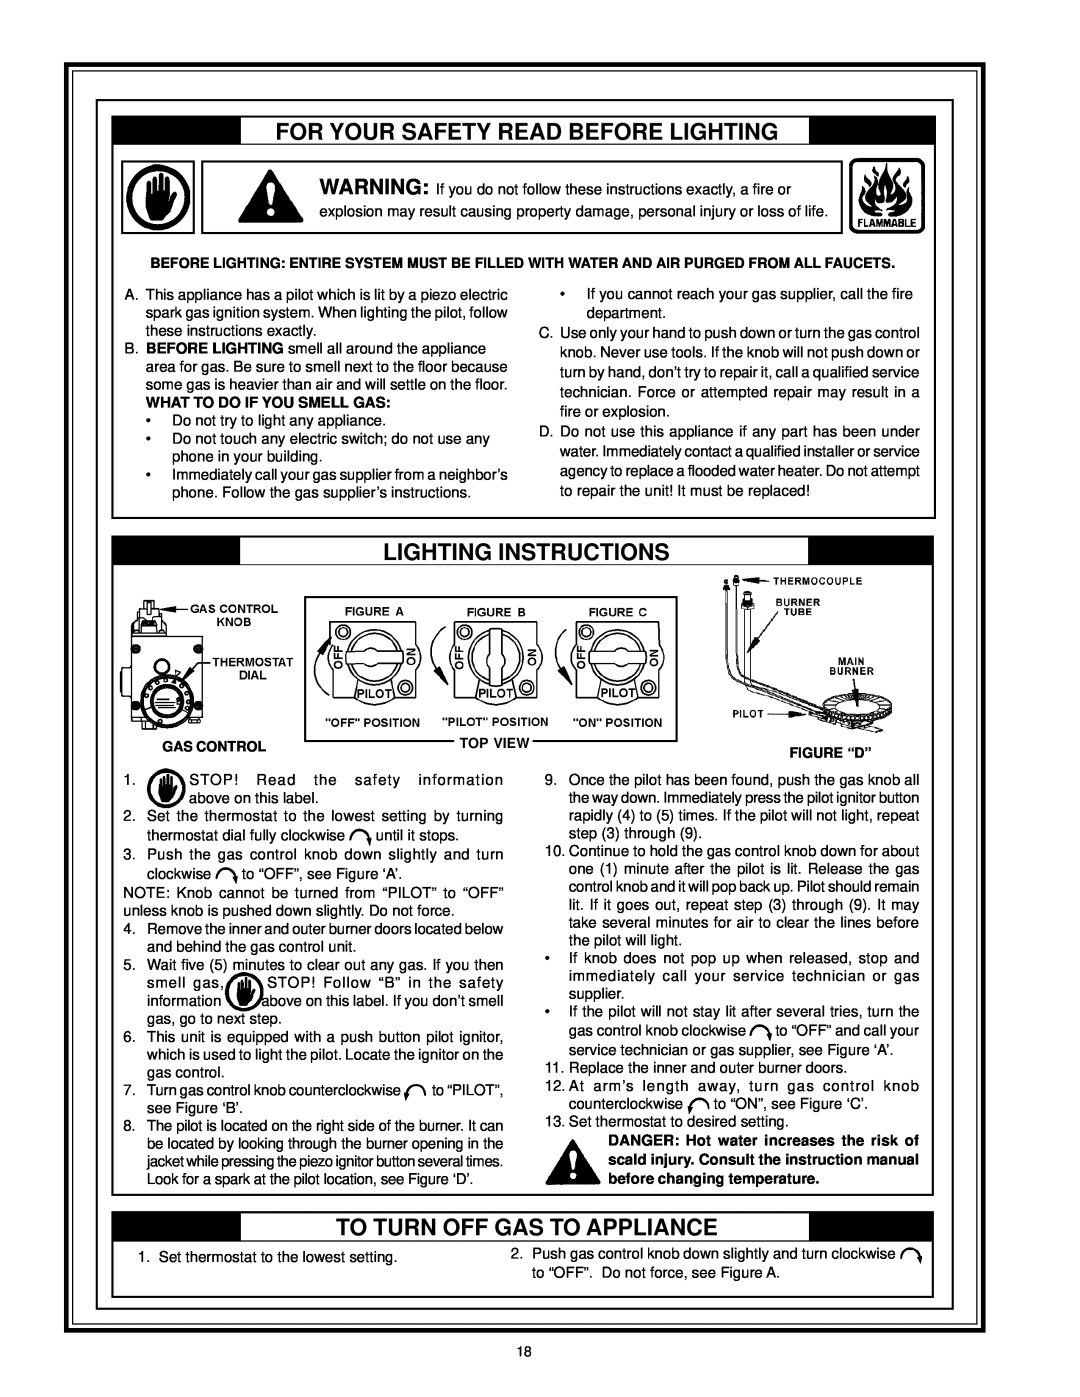 Kenmore 153.338003 For Your Safety Read Before Lighting, Lighting Instructions, To Turn Off Gas To Appliance, Gas Control 